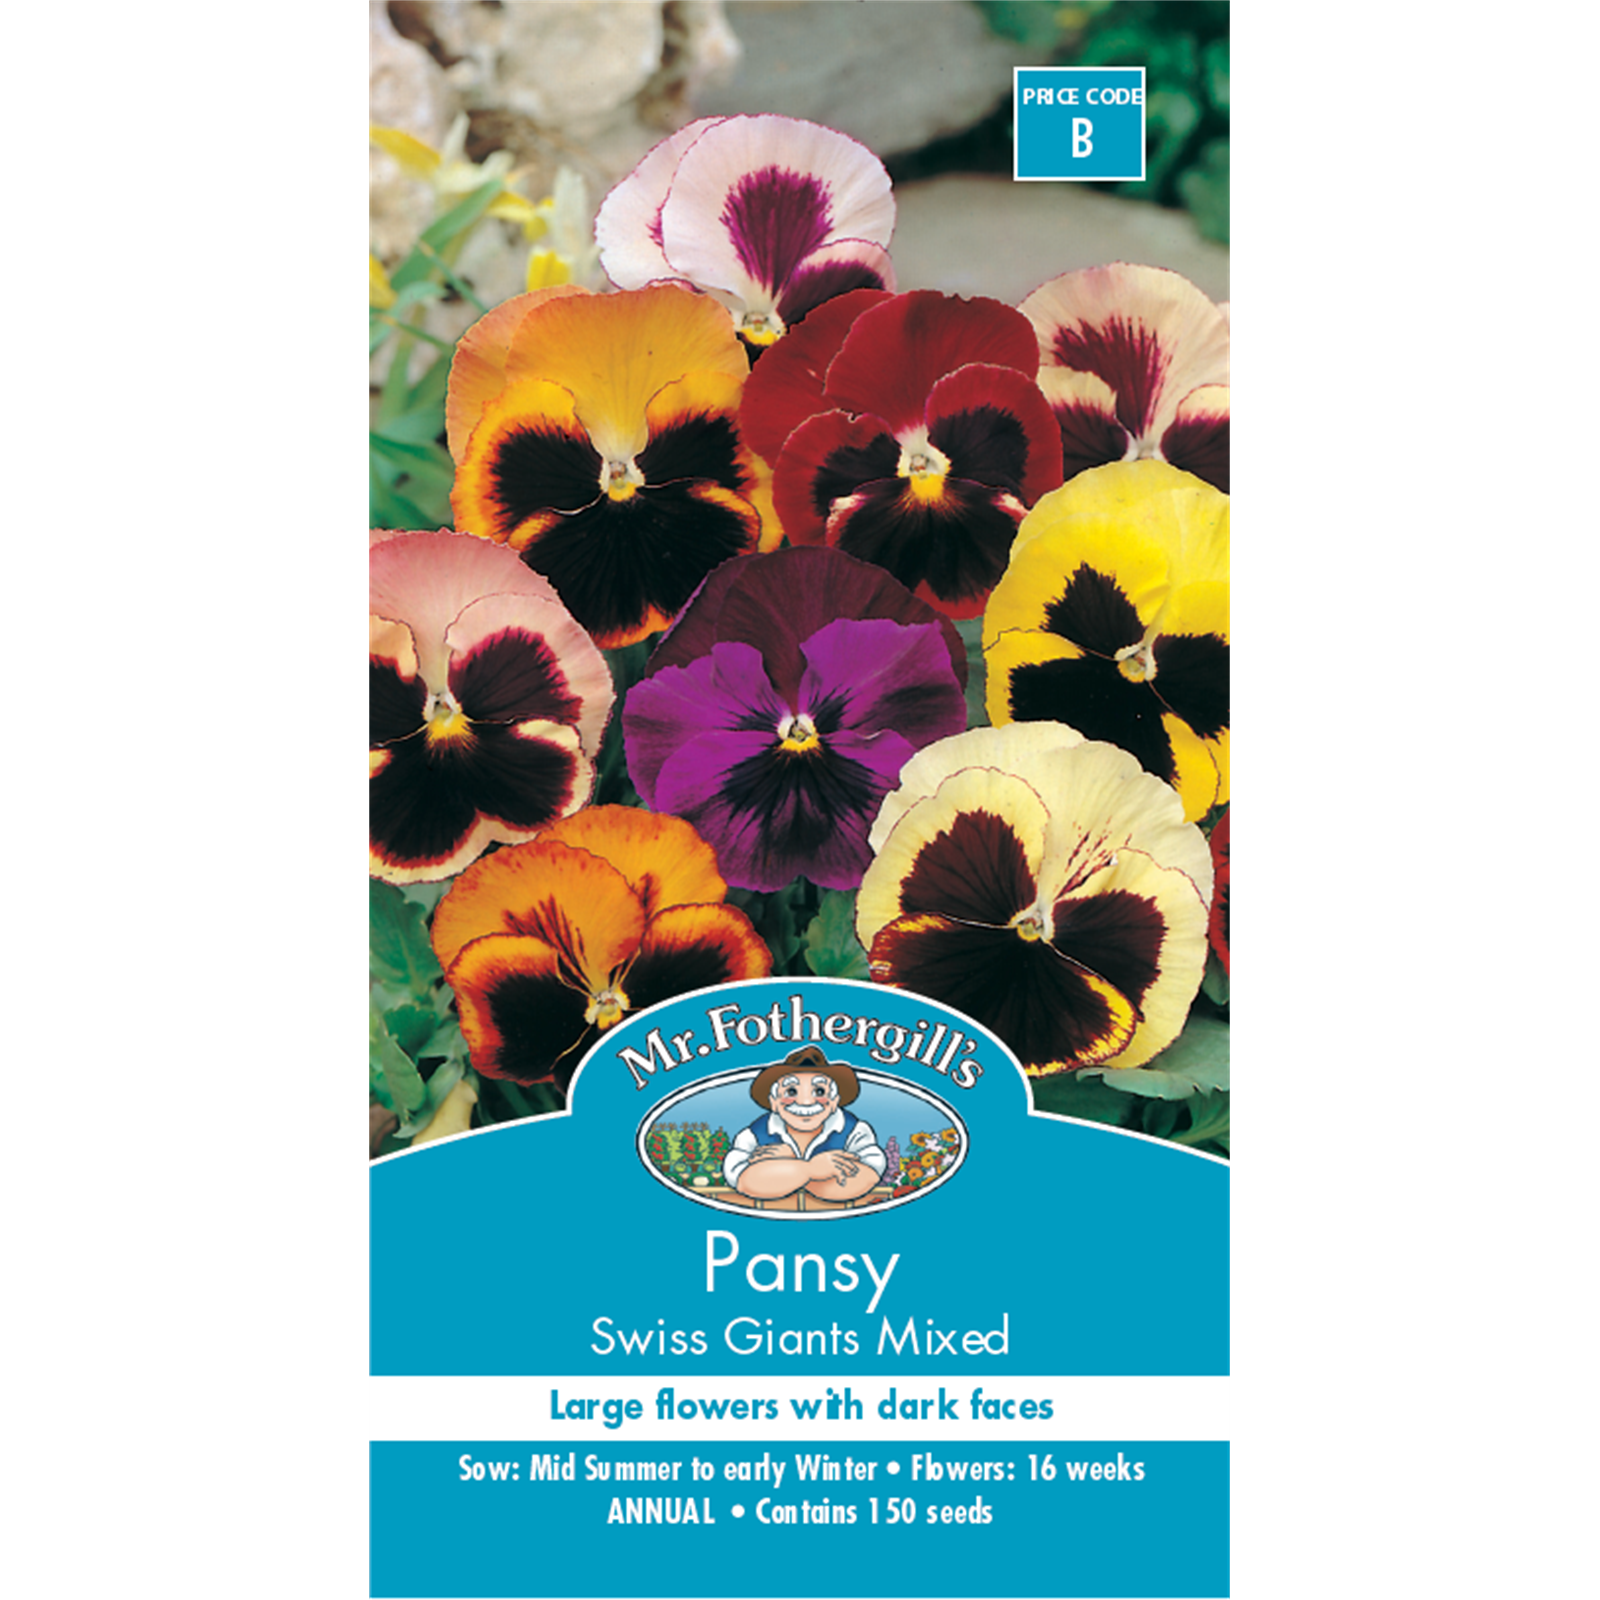 Mr Fothergill's Pansy Swiss Giants Mixed Flower Seeds